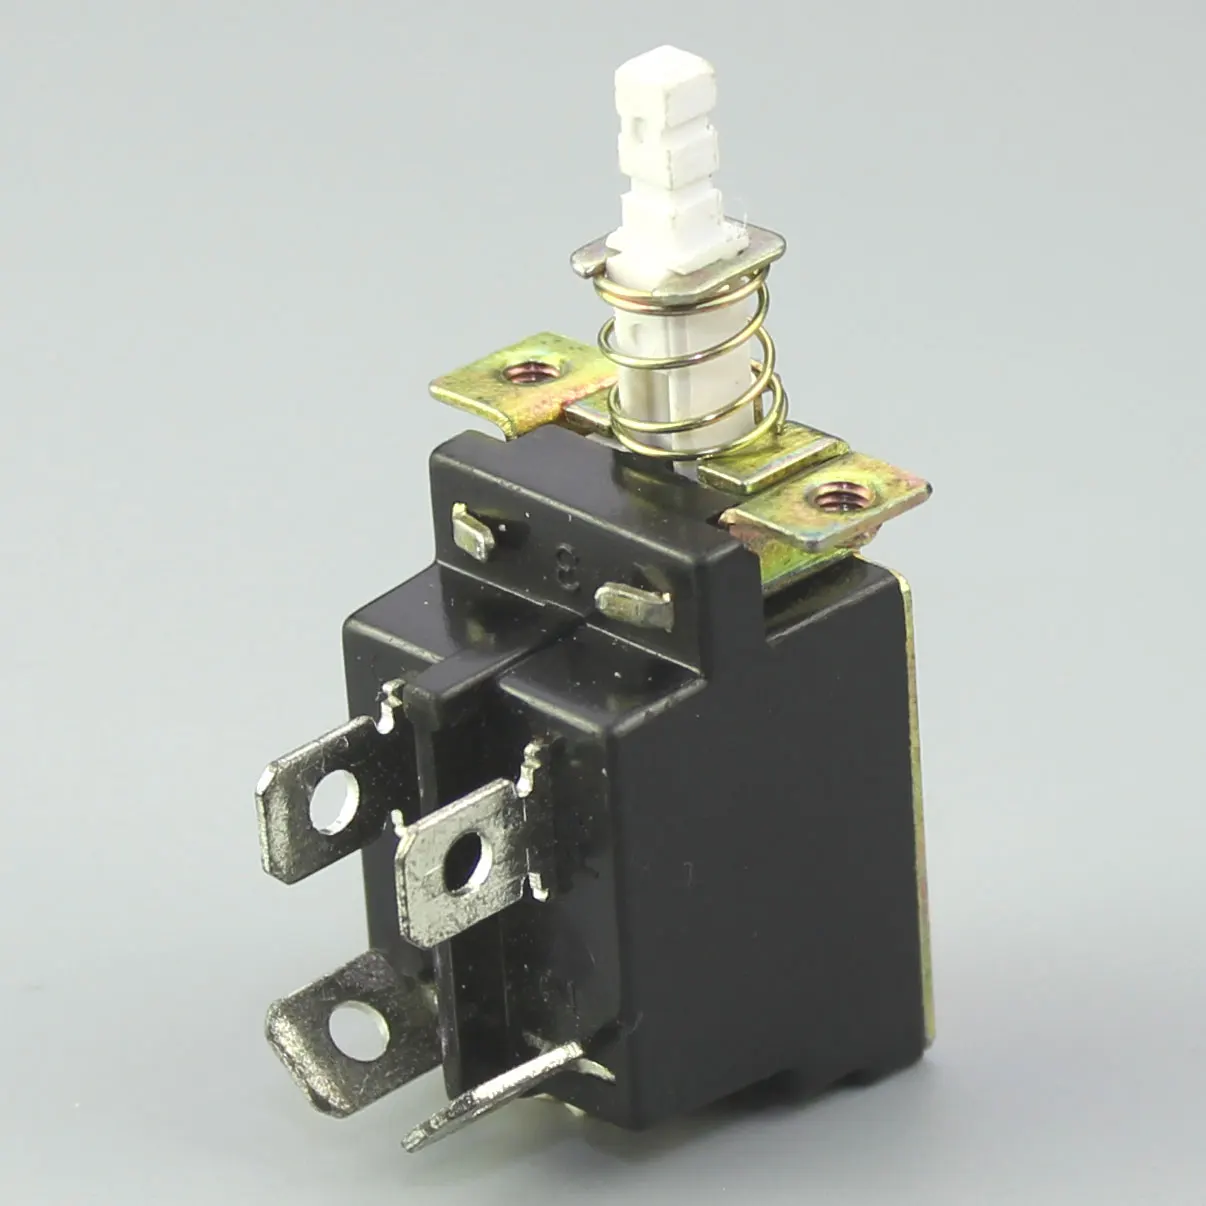 2 x Power Push Switch KDC-A04 250V 5A/80A with Frame Solder Legs 